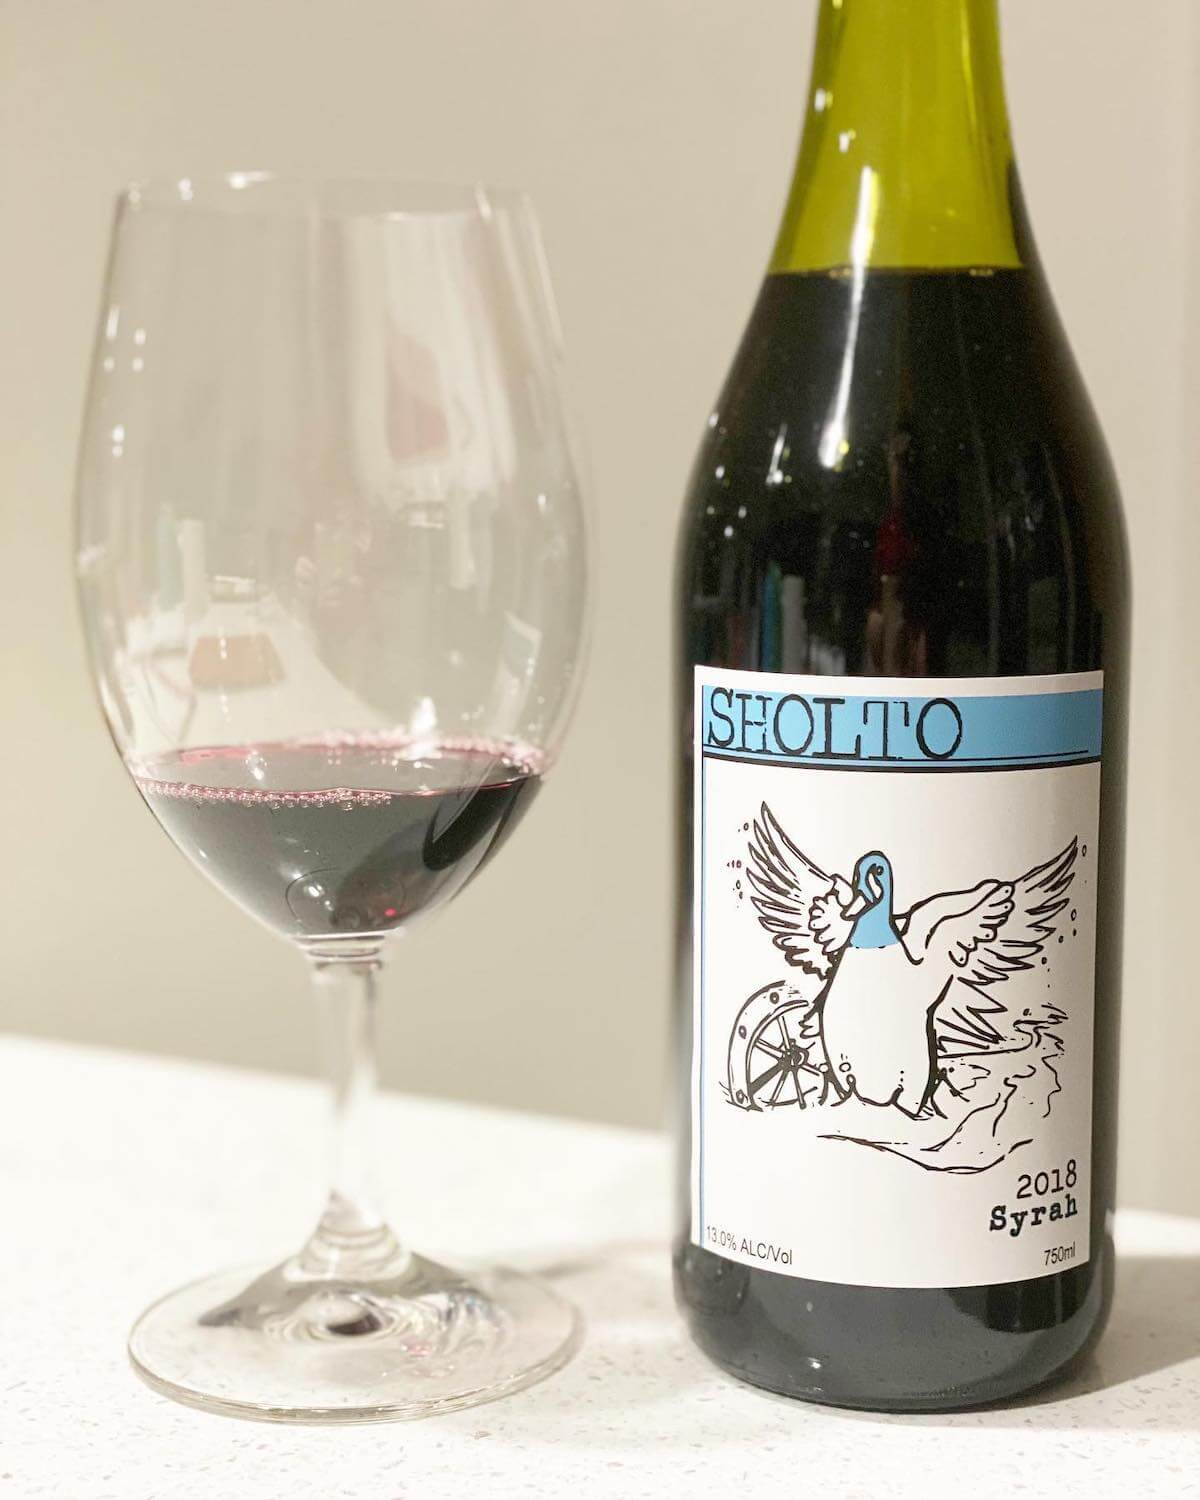 Sholto Wines 2018 Syrah – Canberra